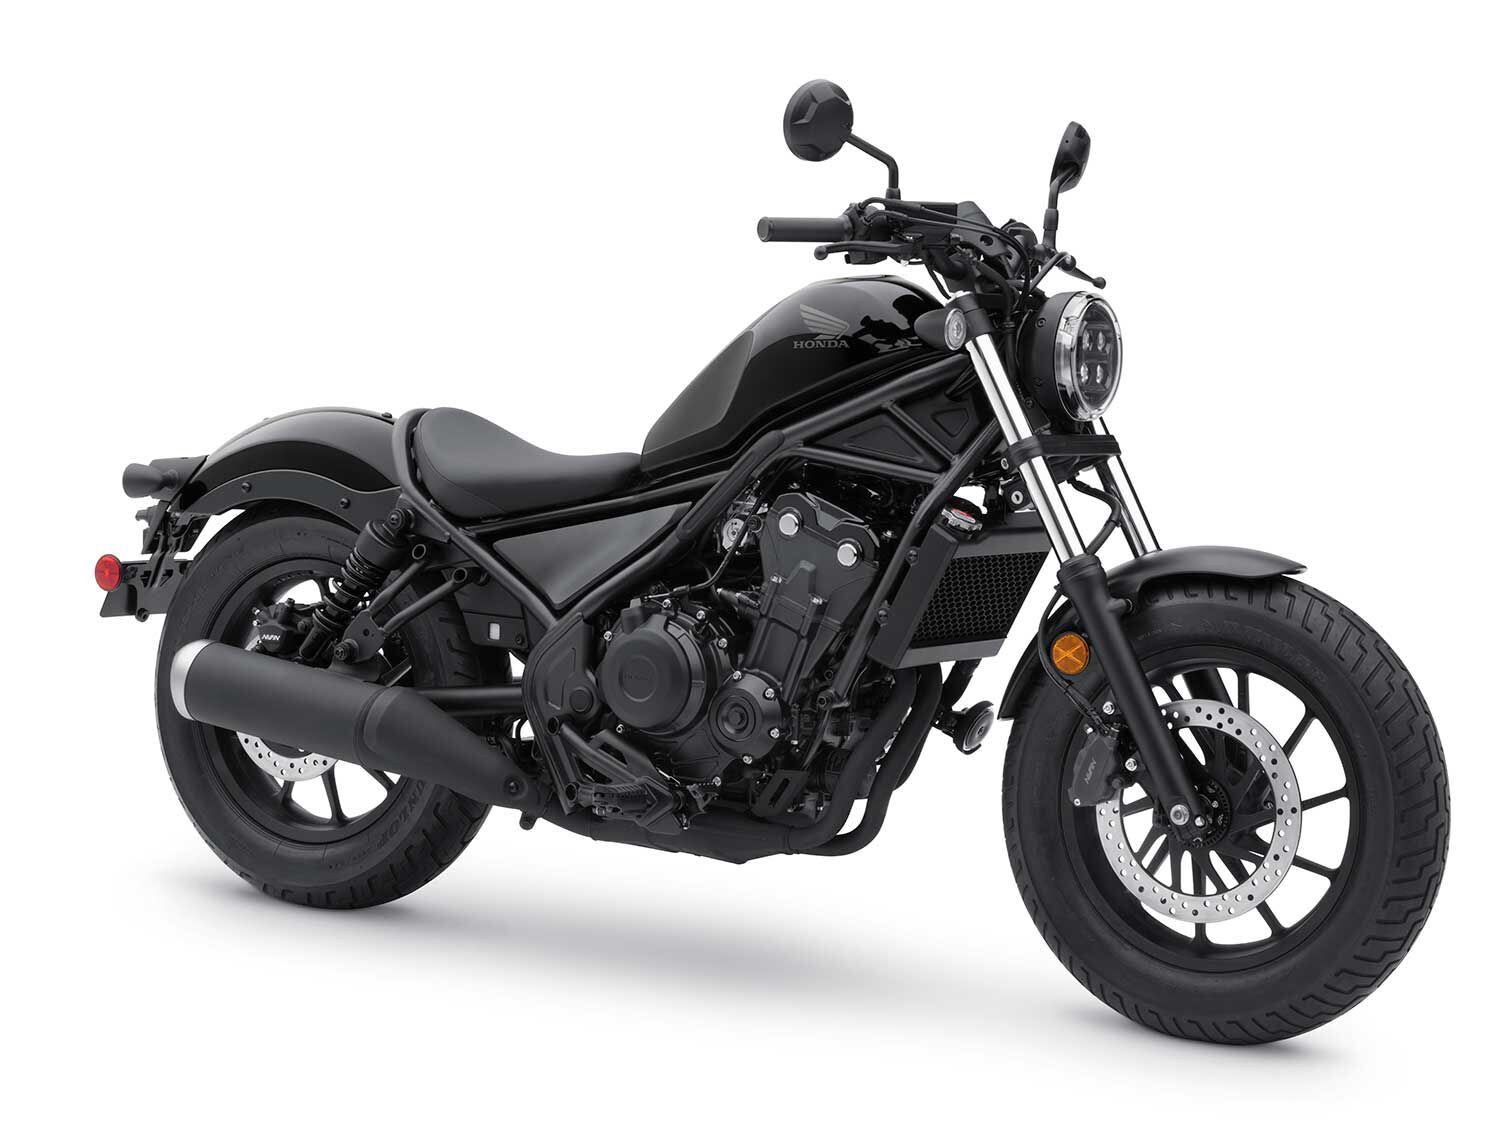 2020 Honda Rebel 300 And 500 Preview Photo Gallery | LaptrinhX